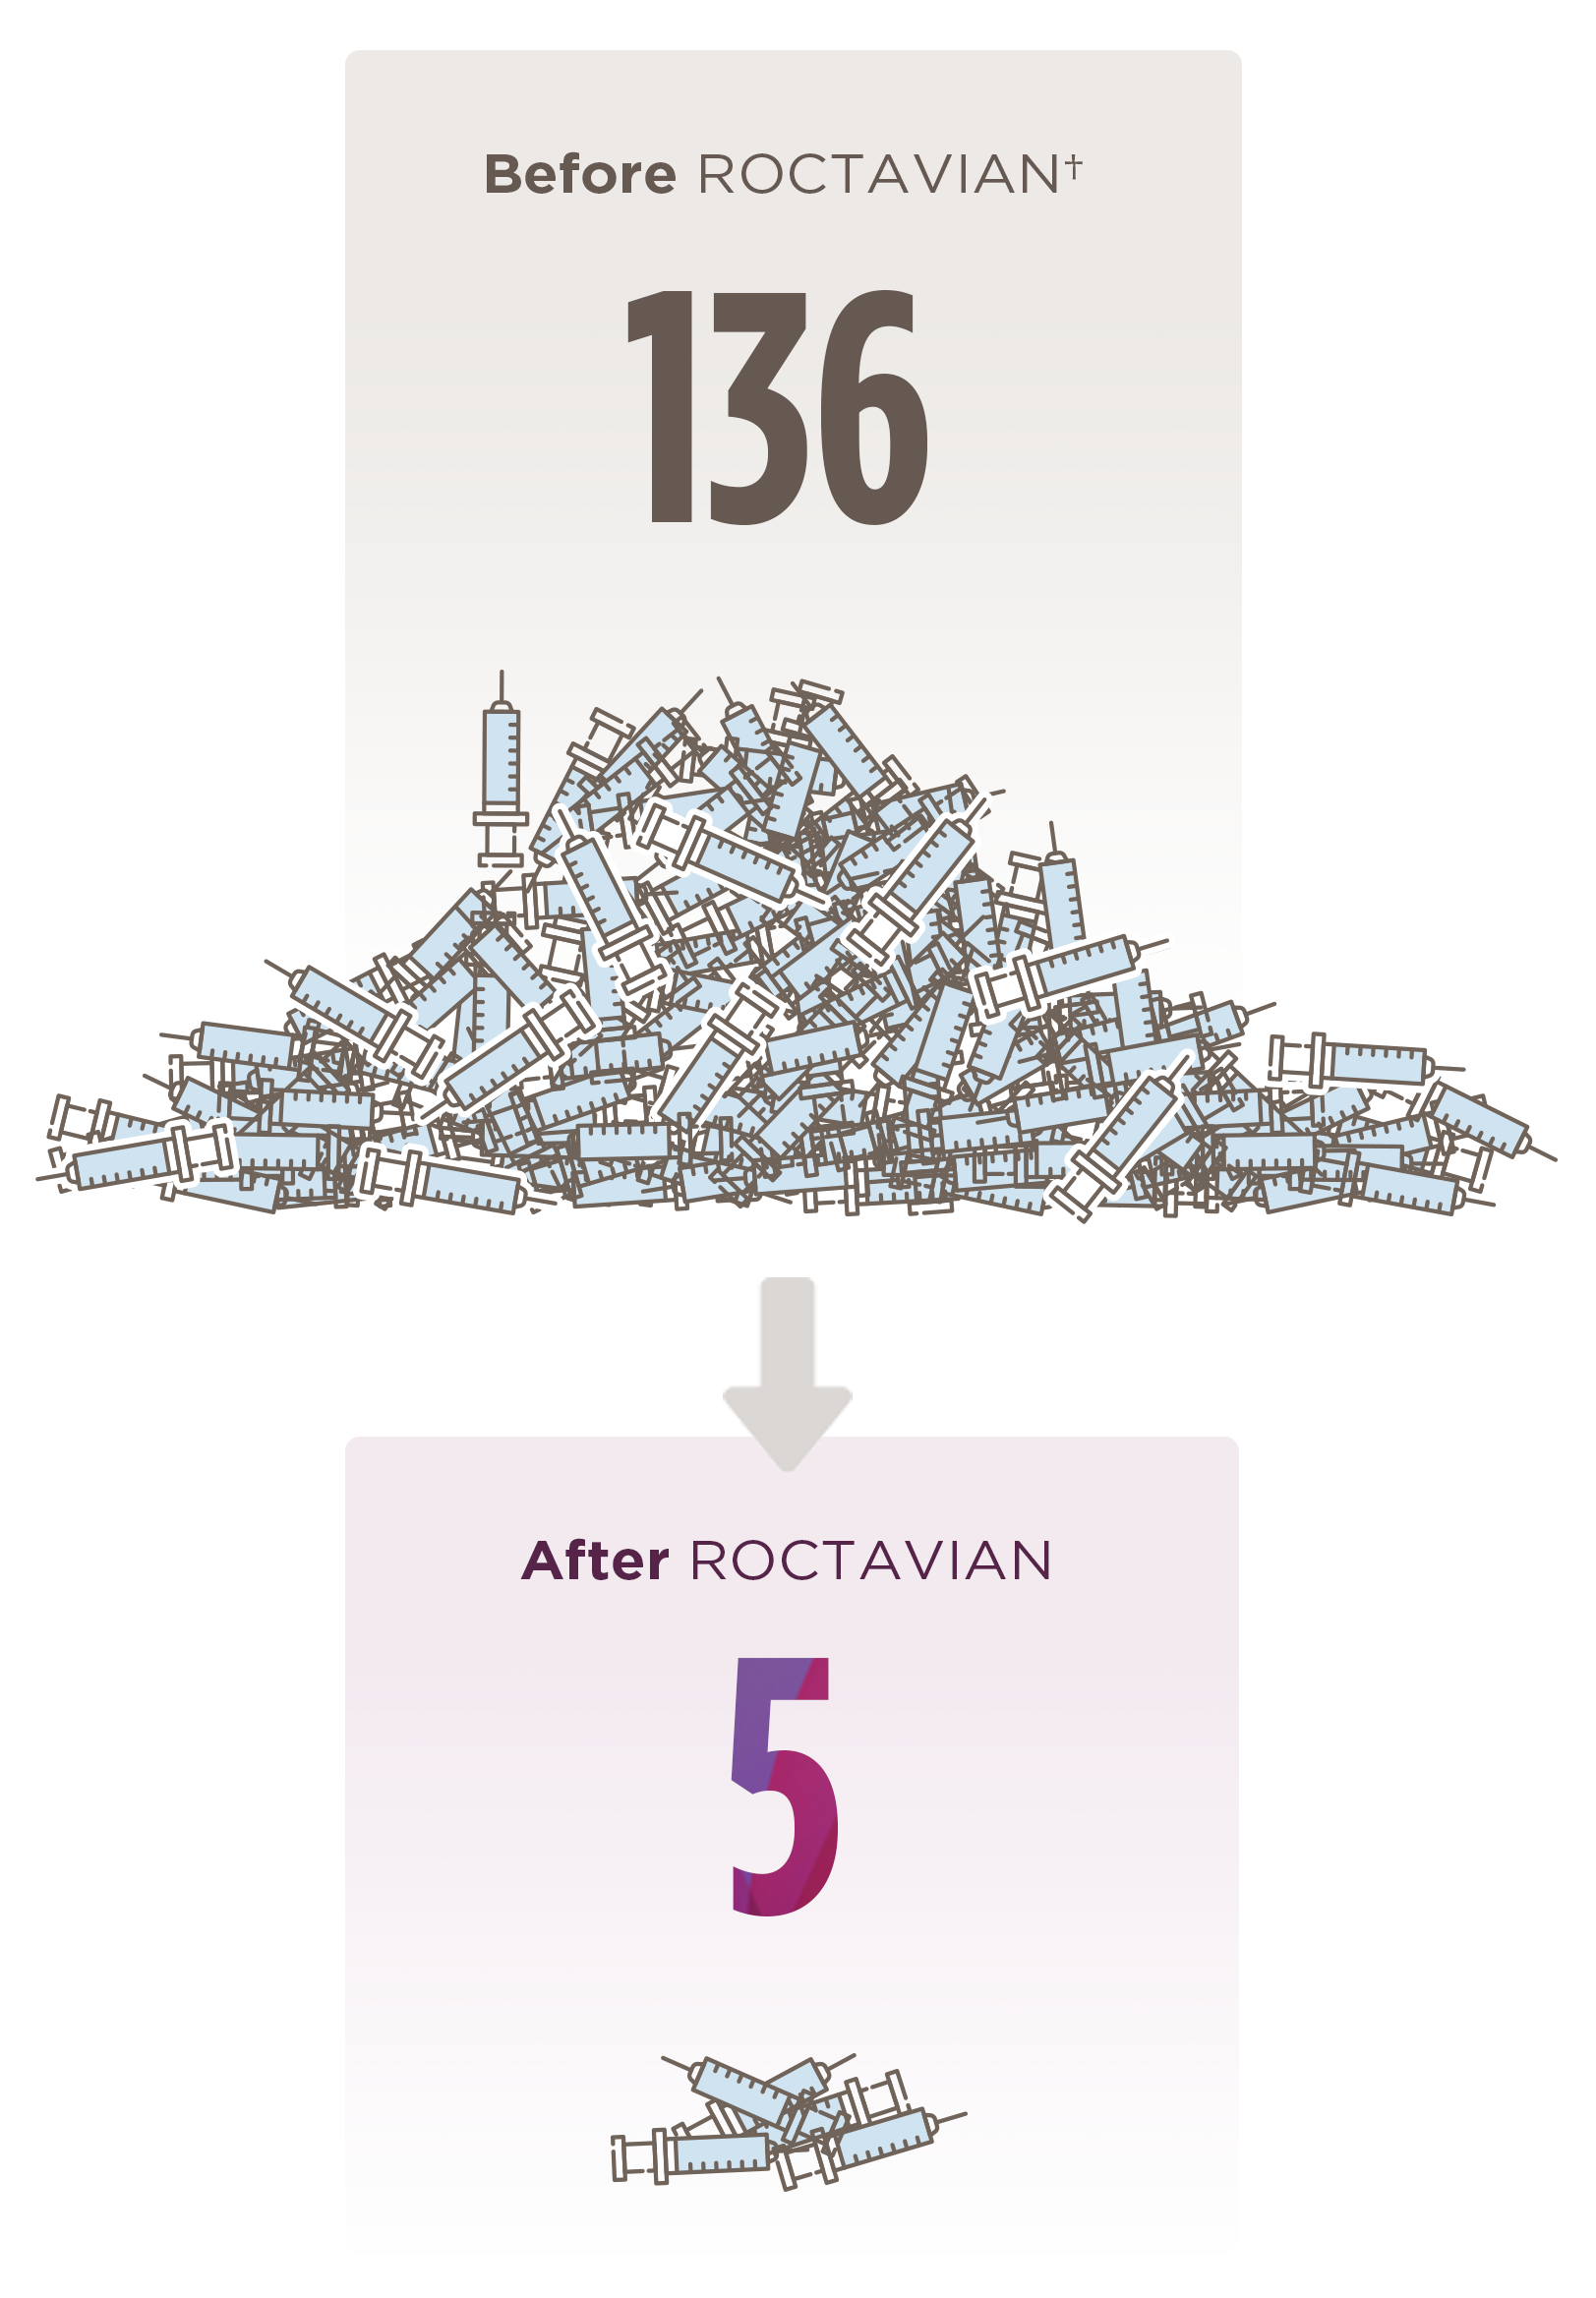 Two piles of empty syringes. The Before ROCTAVIAN(dagger footnote symbol) pile on the left is large and has the number 136 over it. The After ROCTAVIAN pile on the right is small and has the number 5 over it.